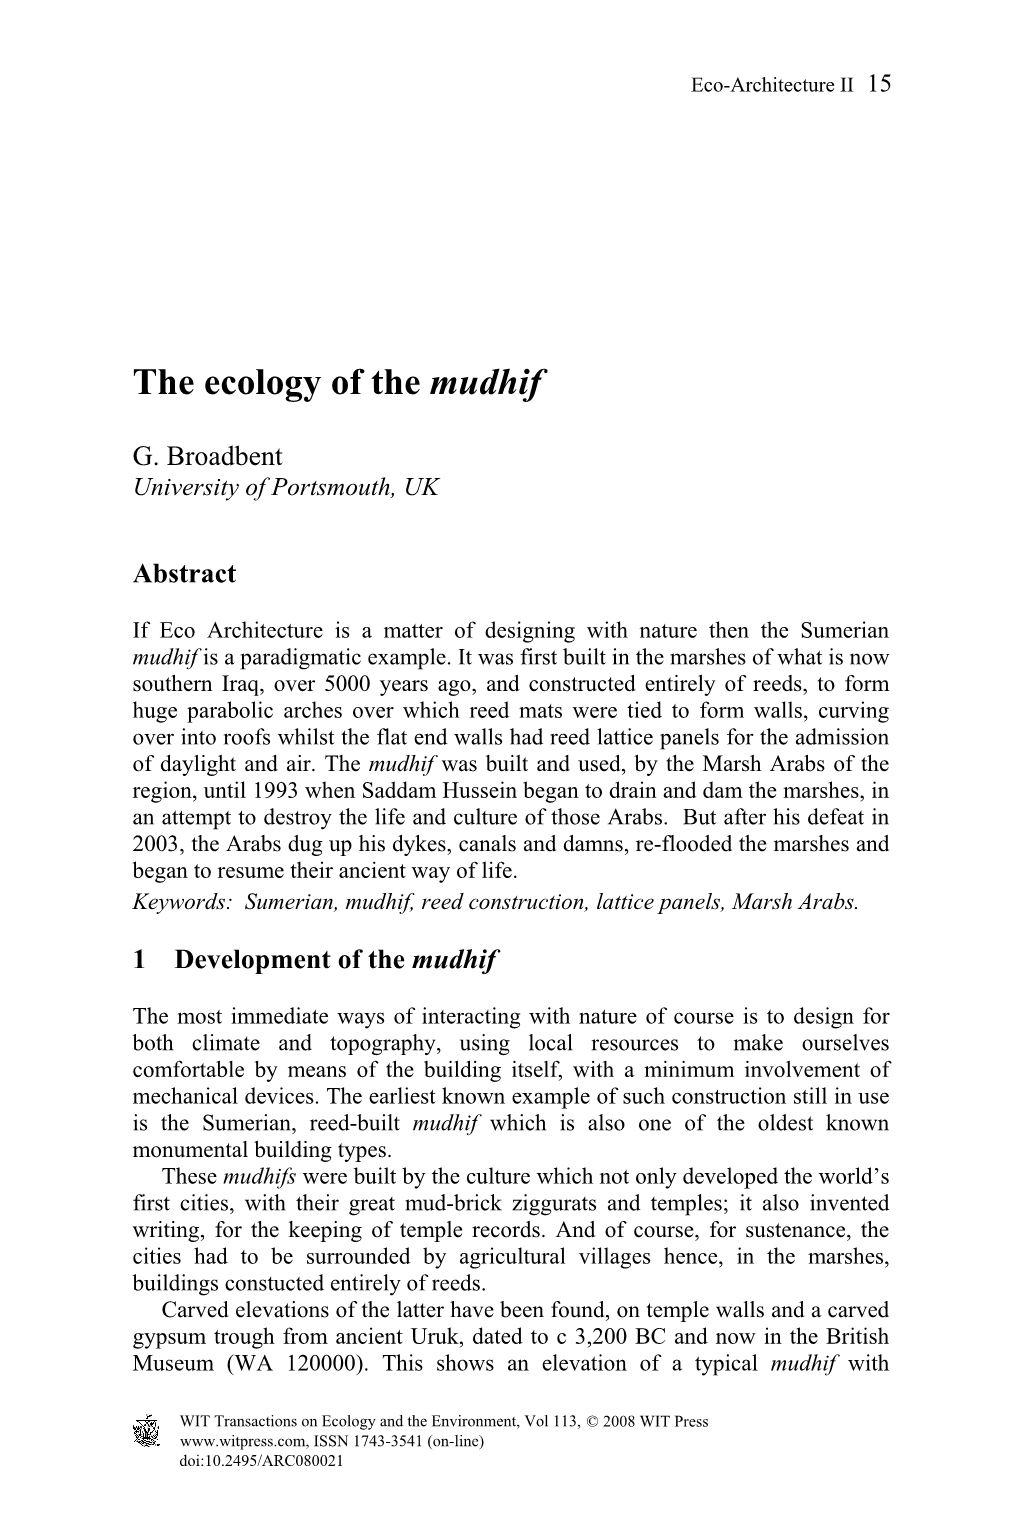 The Ecology of the Mudhif